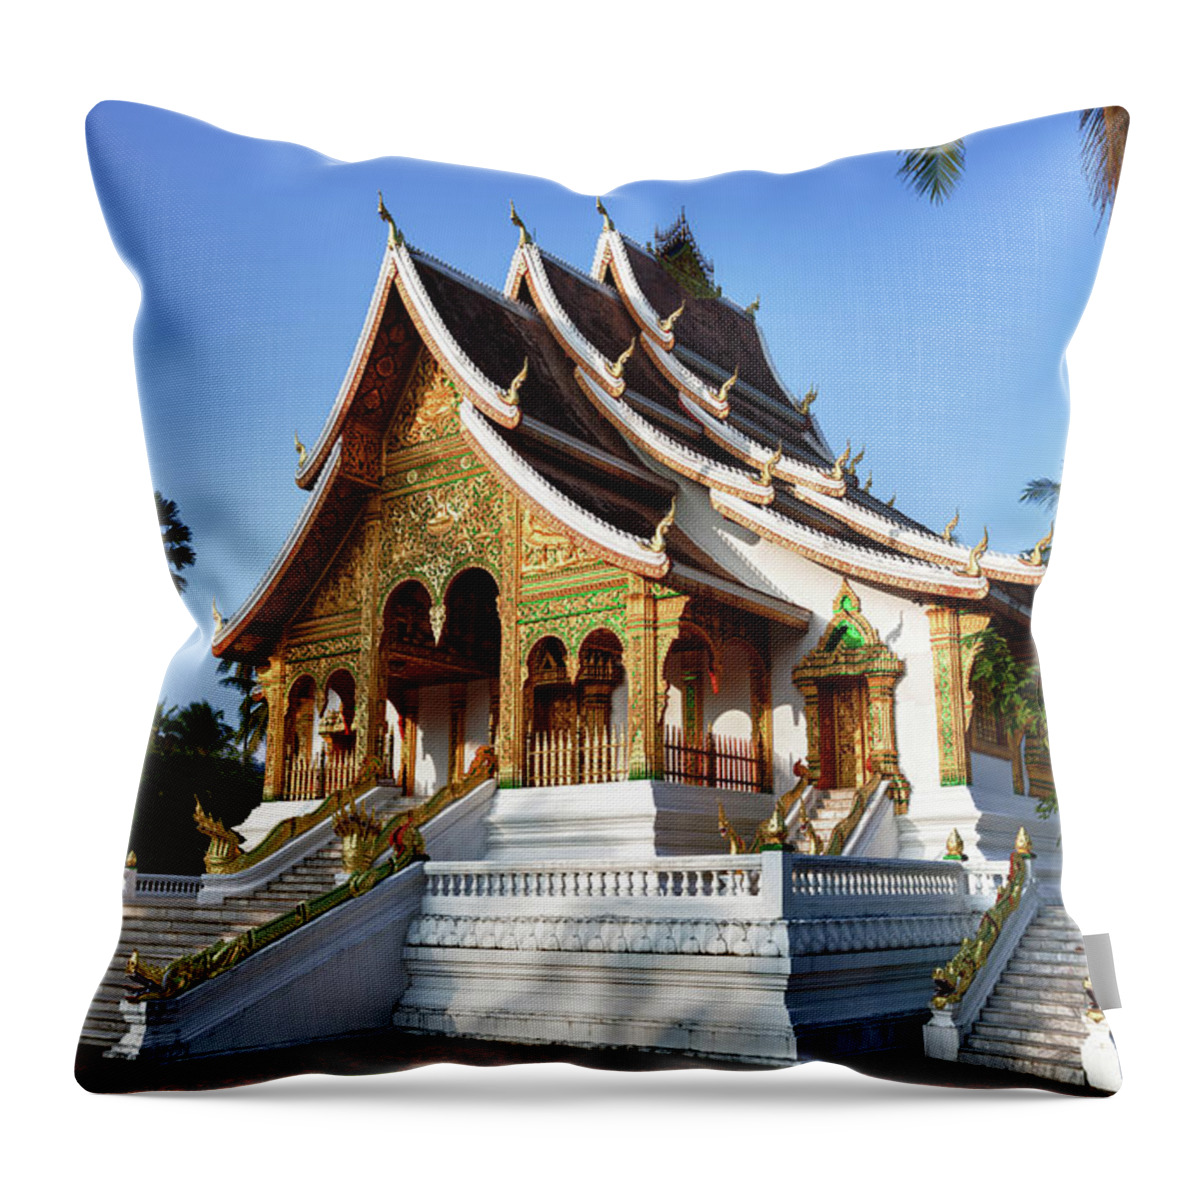 Asian And Indian Ethnicities Throw Pillow featuring the photograph Wat Mai Suwannaphumaham In Luang #1 by Fototrav